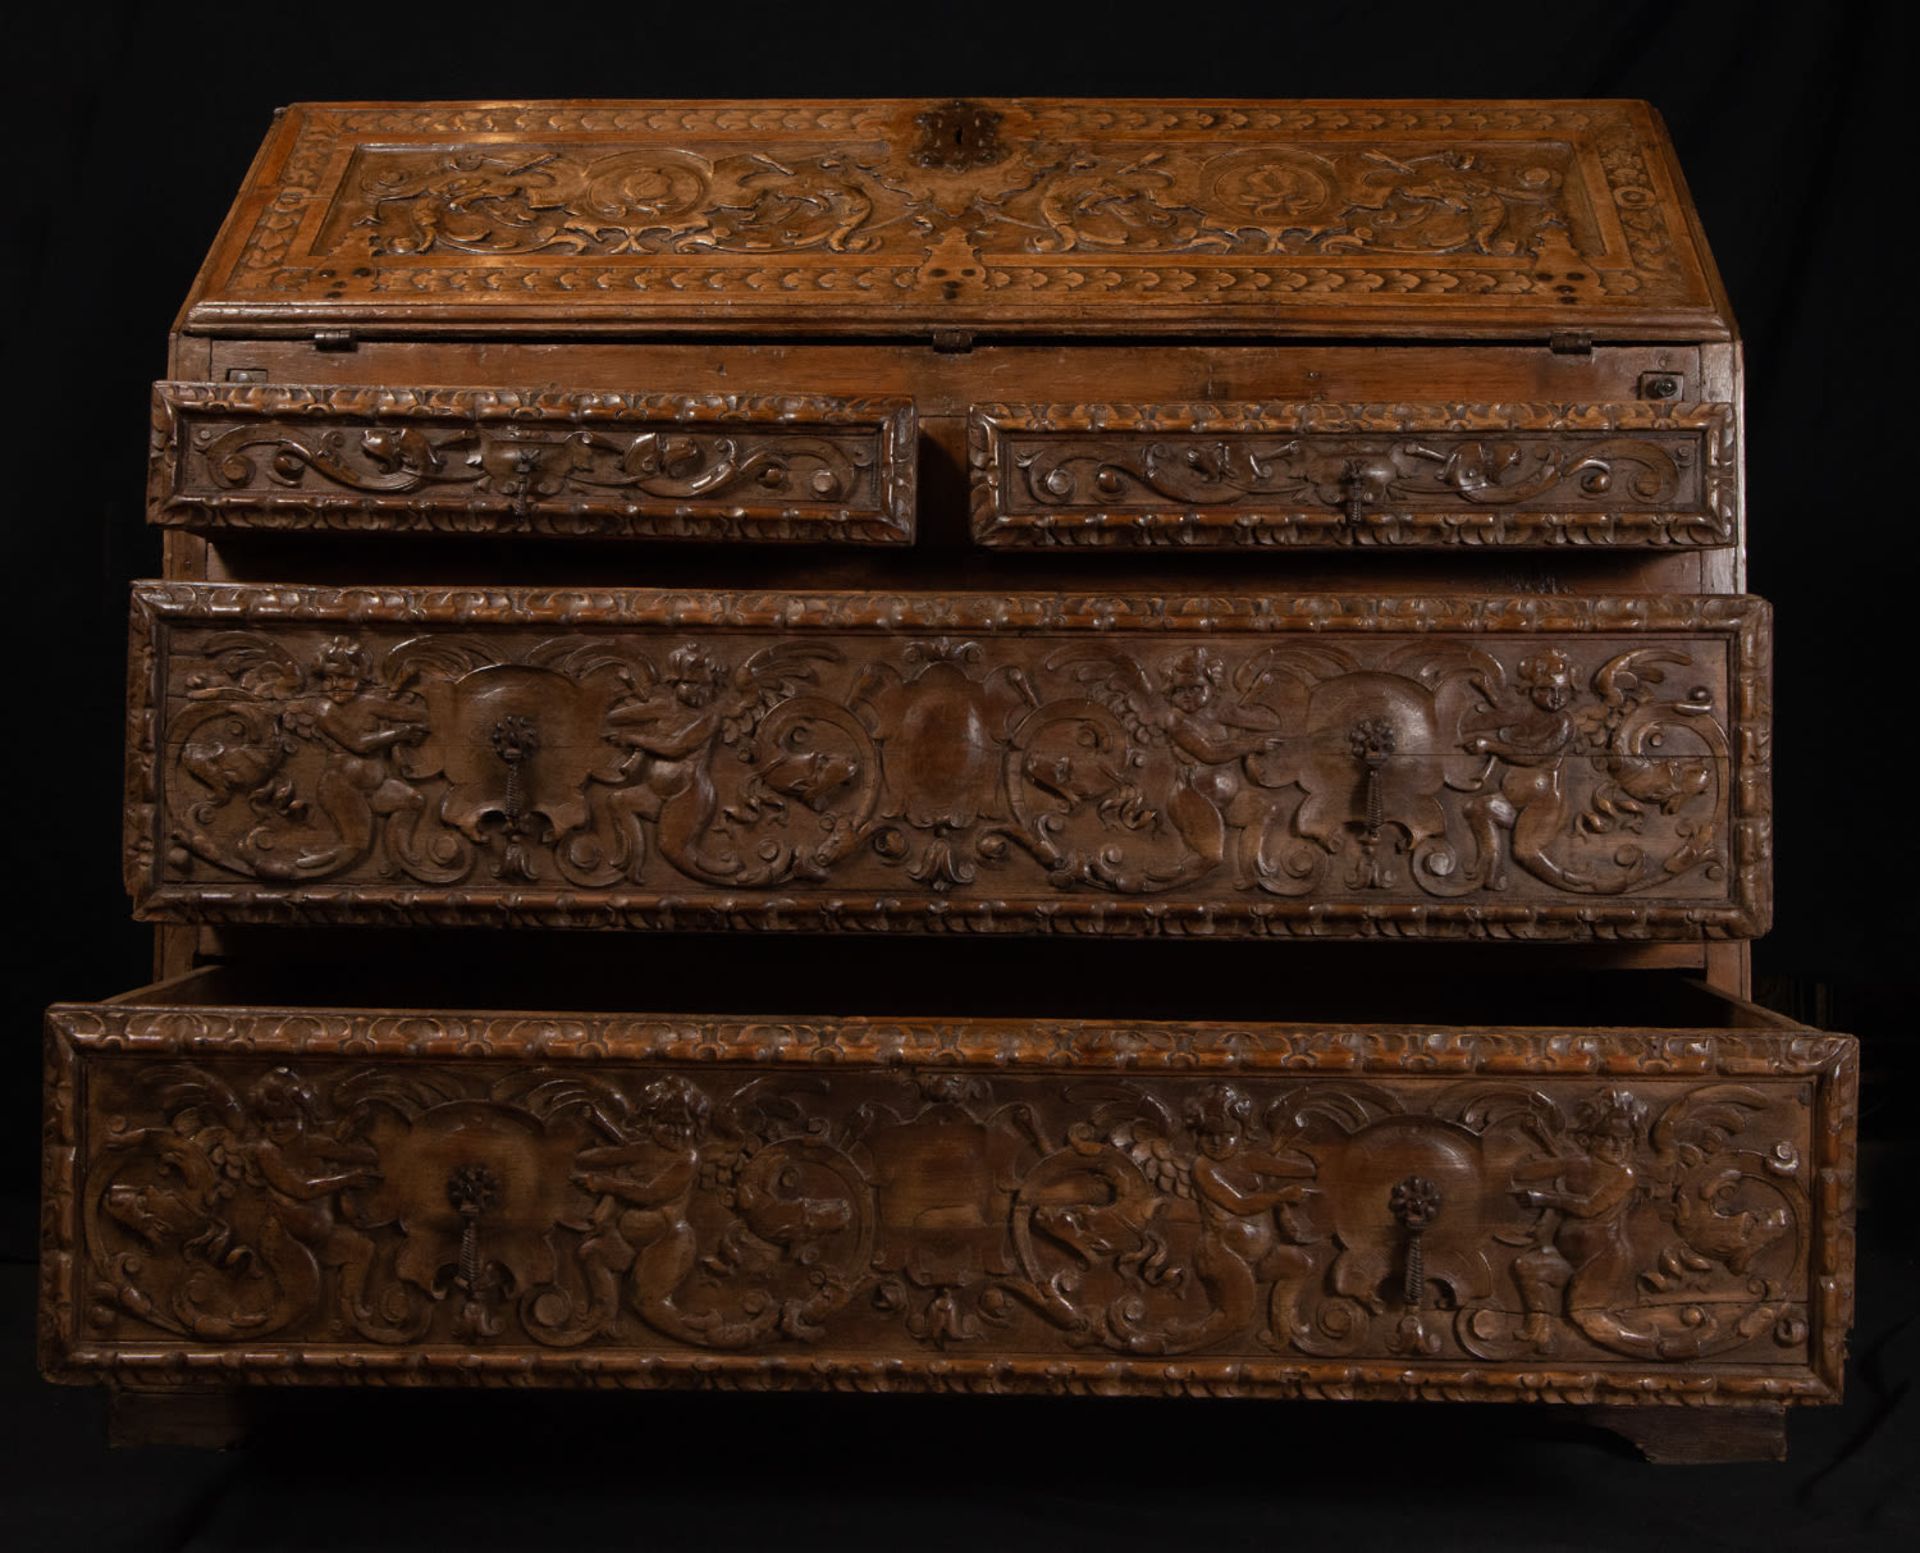 Exceptional Plateresque Desk Cabinet, Spanish Renaissance school of the 16th century - Image 5 of 9